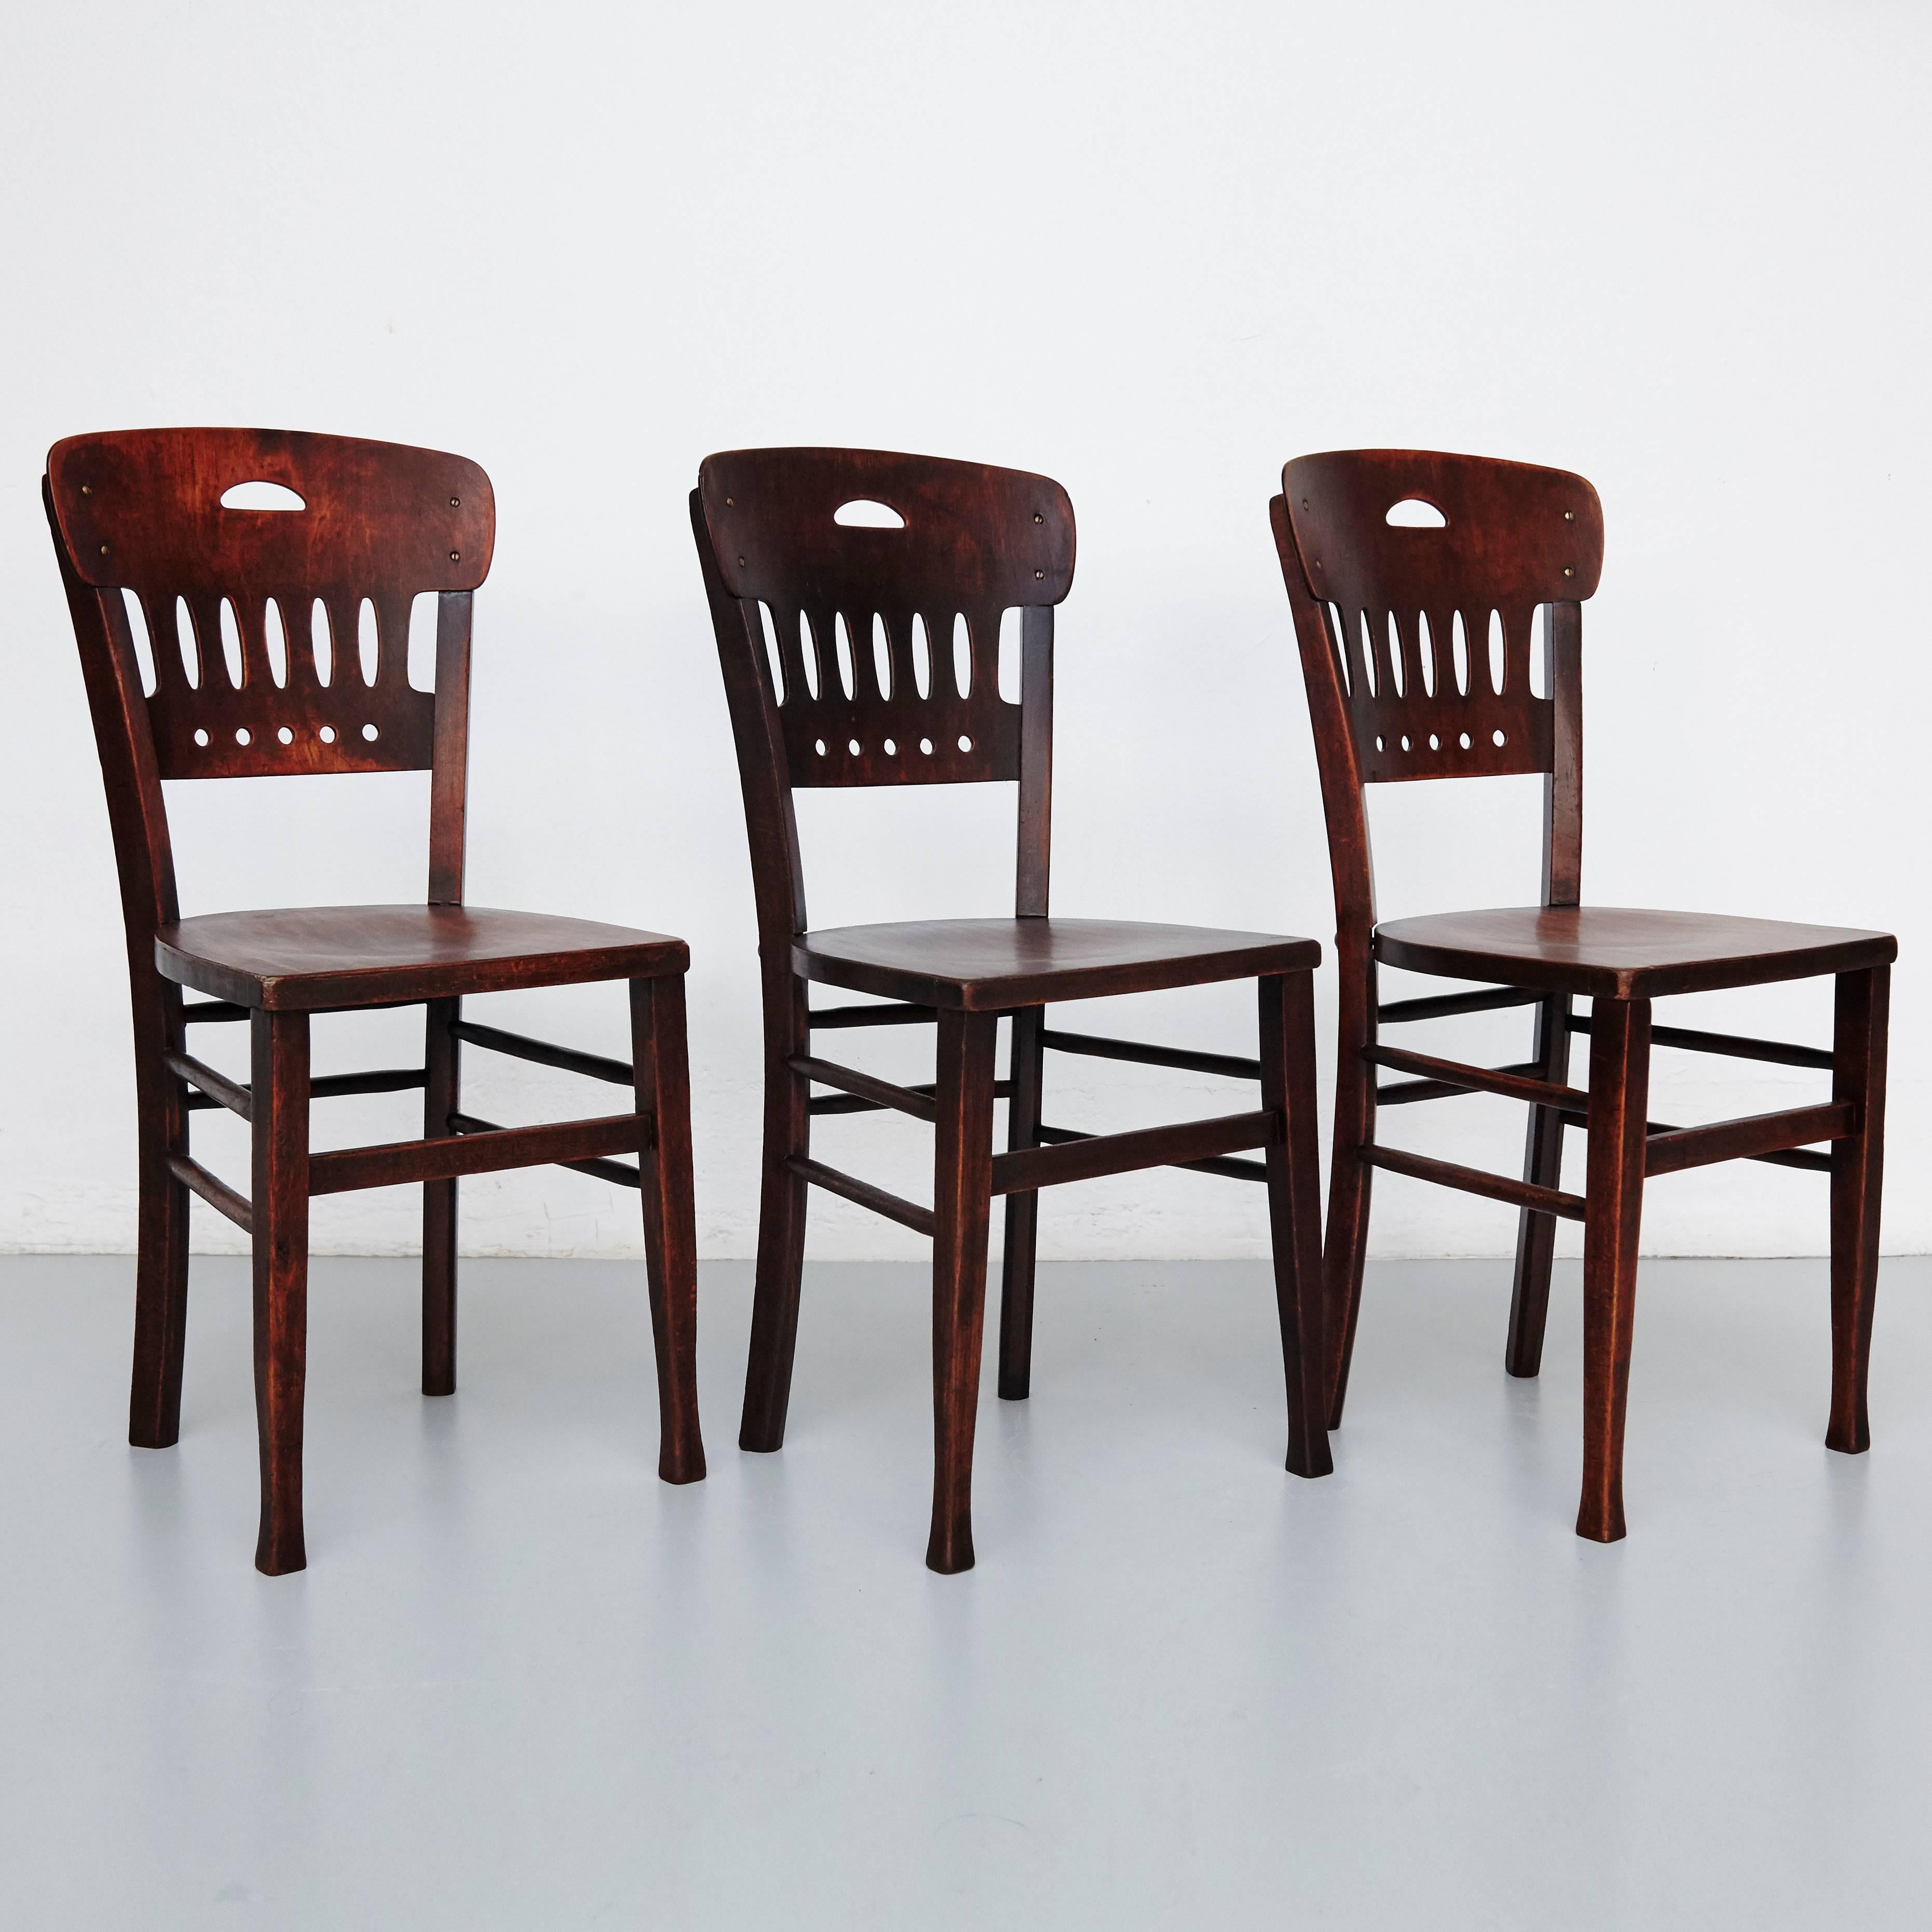 Set of 12 bistro chairs of the Luterma manufactured in Estonia, circa 1900.

In original condition, with minor wear consistent with age and use, preserving a beautiful patina. 


Chairs of the old Luterma Estonian manufactory founded in 1896 in